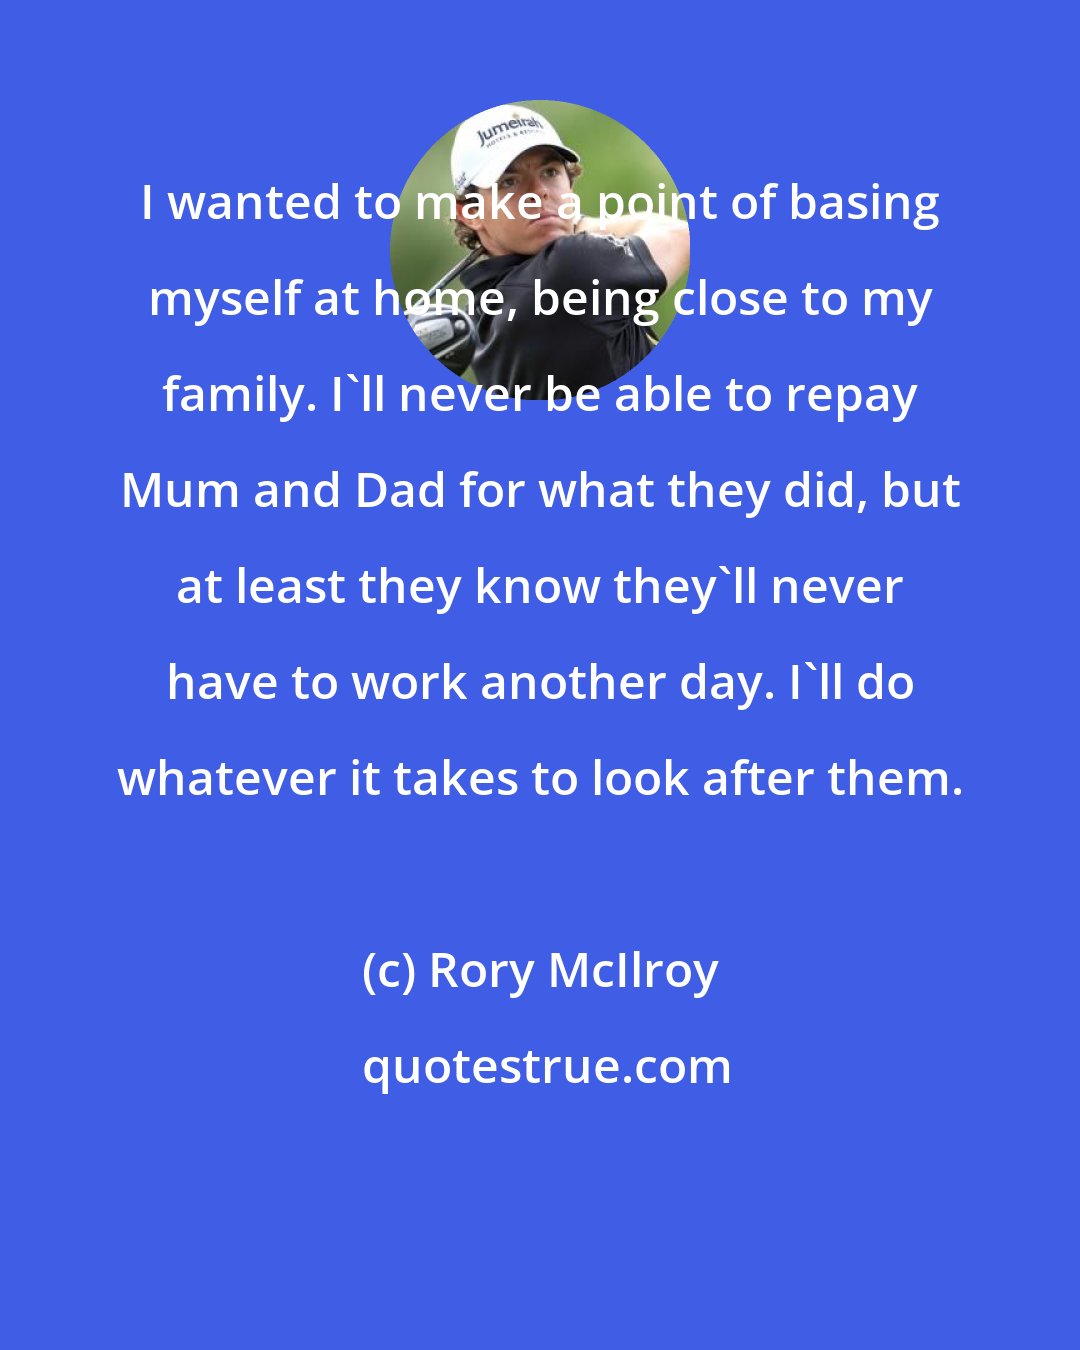 Rory McIlroy: I wanted to make a point of basing myself at home, being close to my family. I'll never be able to repay Mum and Dad for what they did, but at least they know they'll never have to work another day. I'll do whatever it takes to look after them.